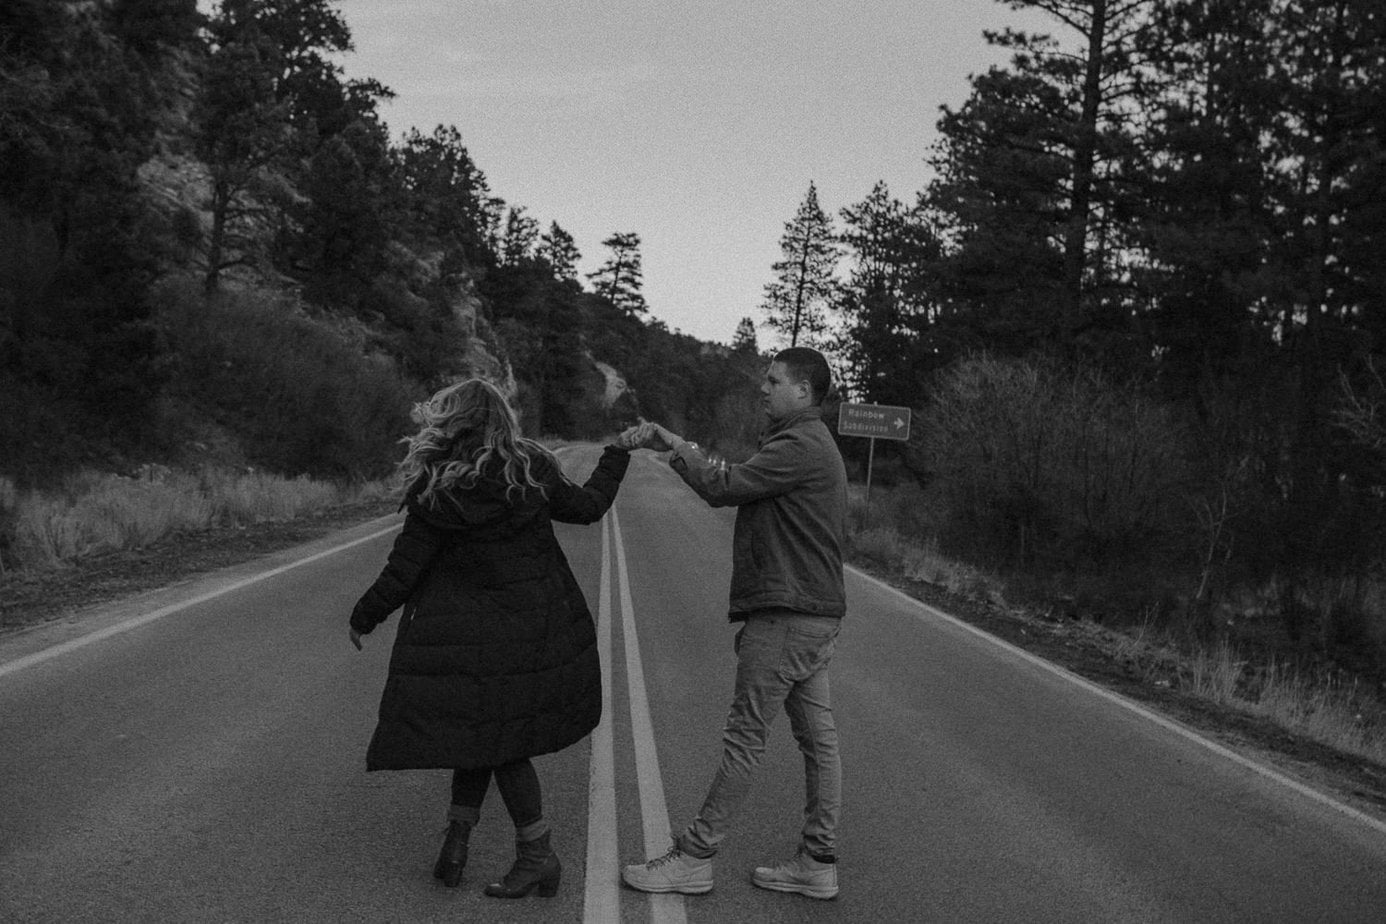 Couple dances in the road surrounded by trees on the mountaintop